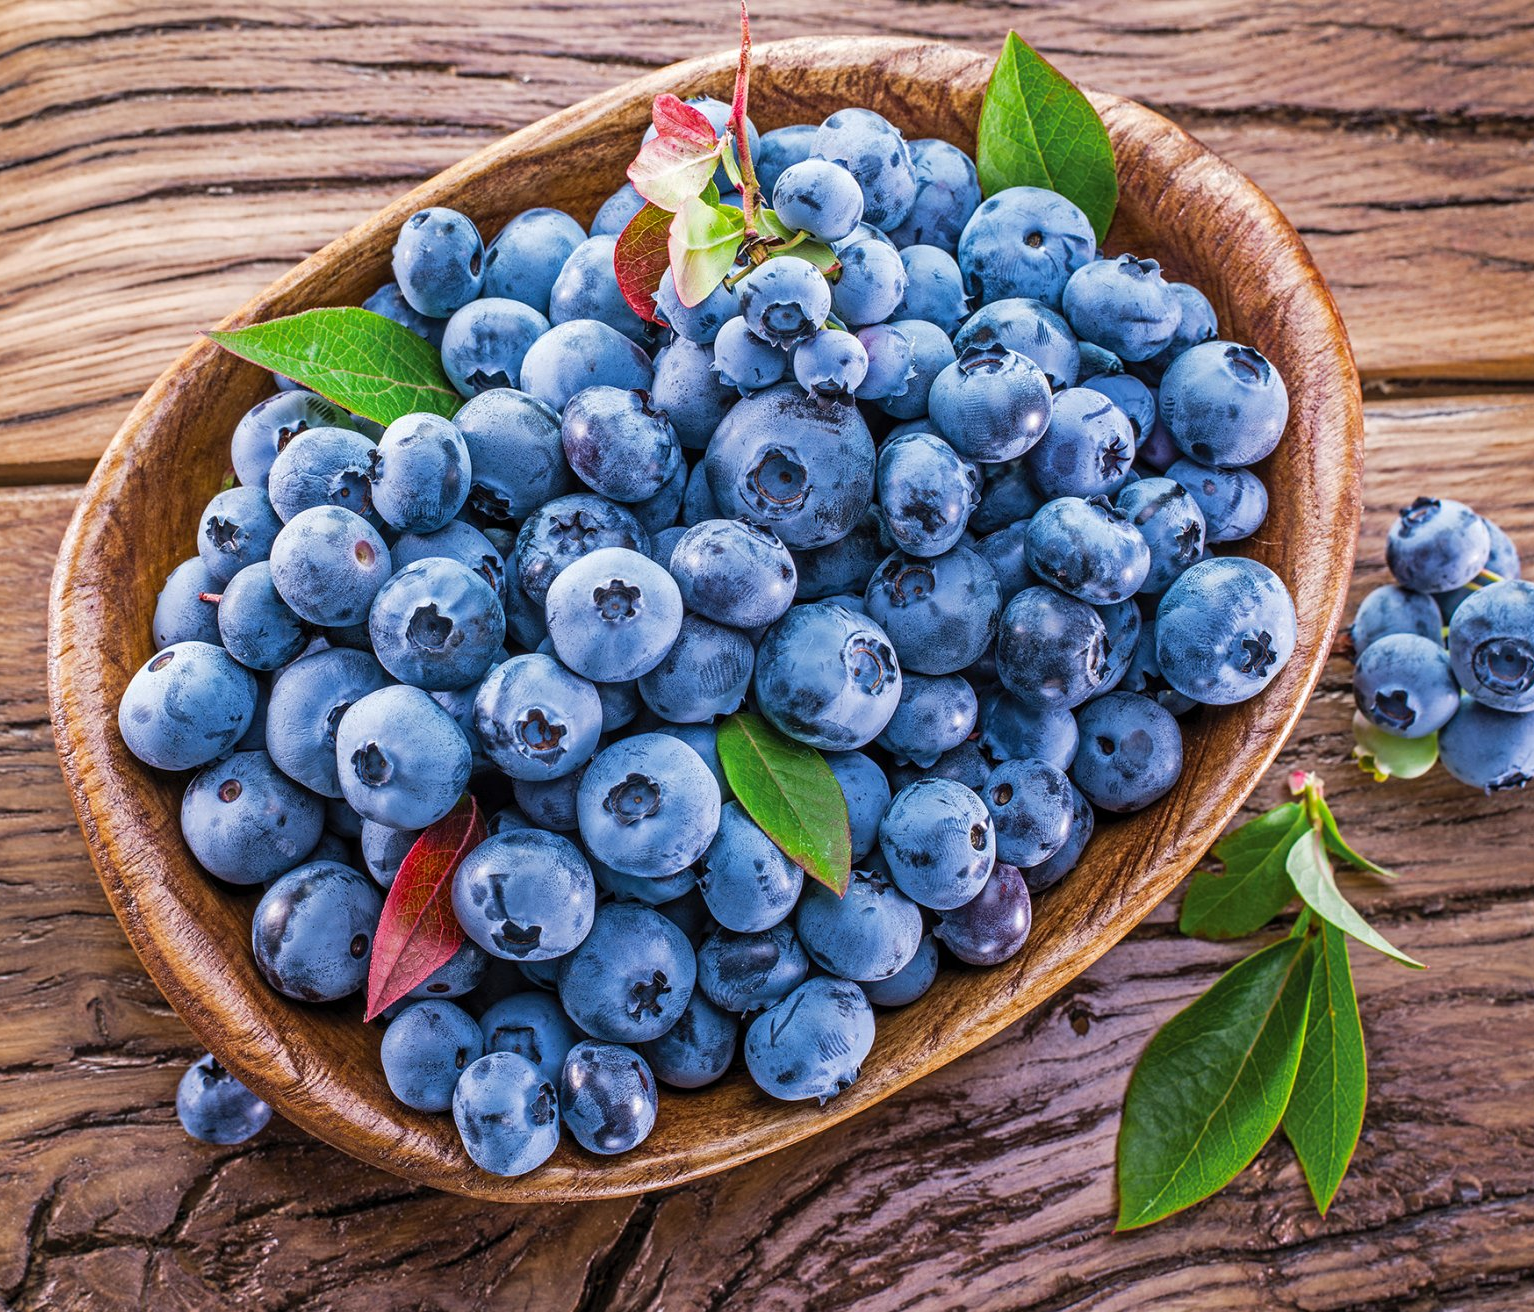 Blueray Blueberry Plants for sale in Lebanon